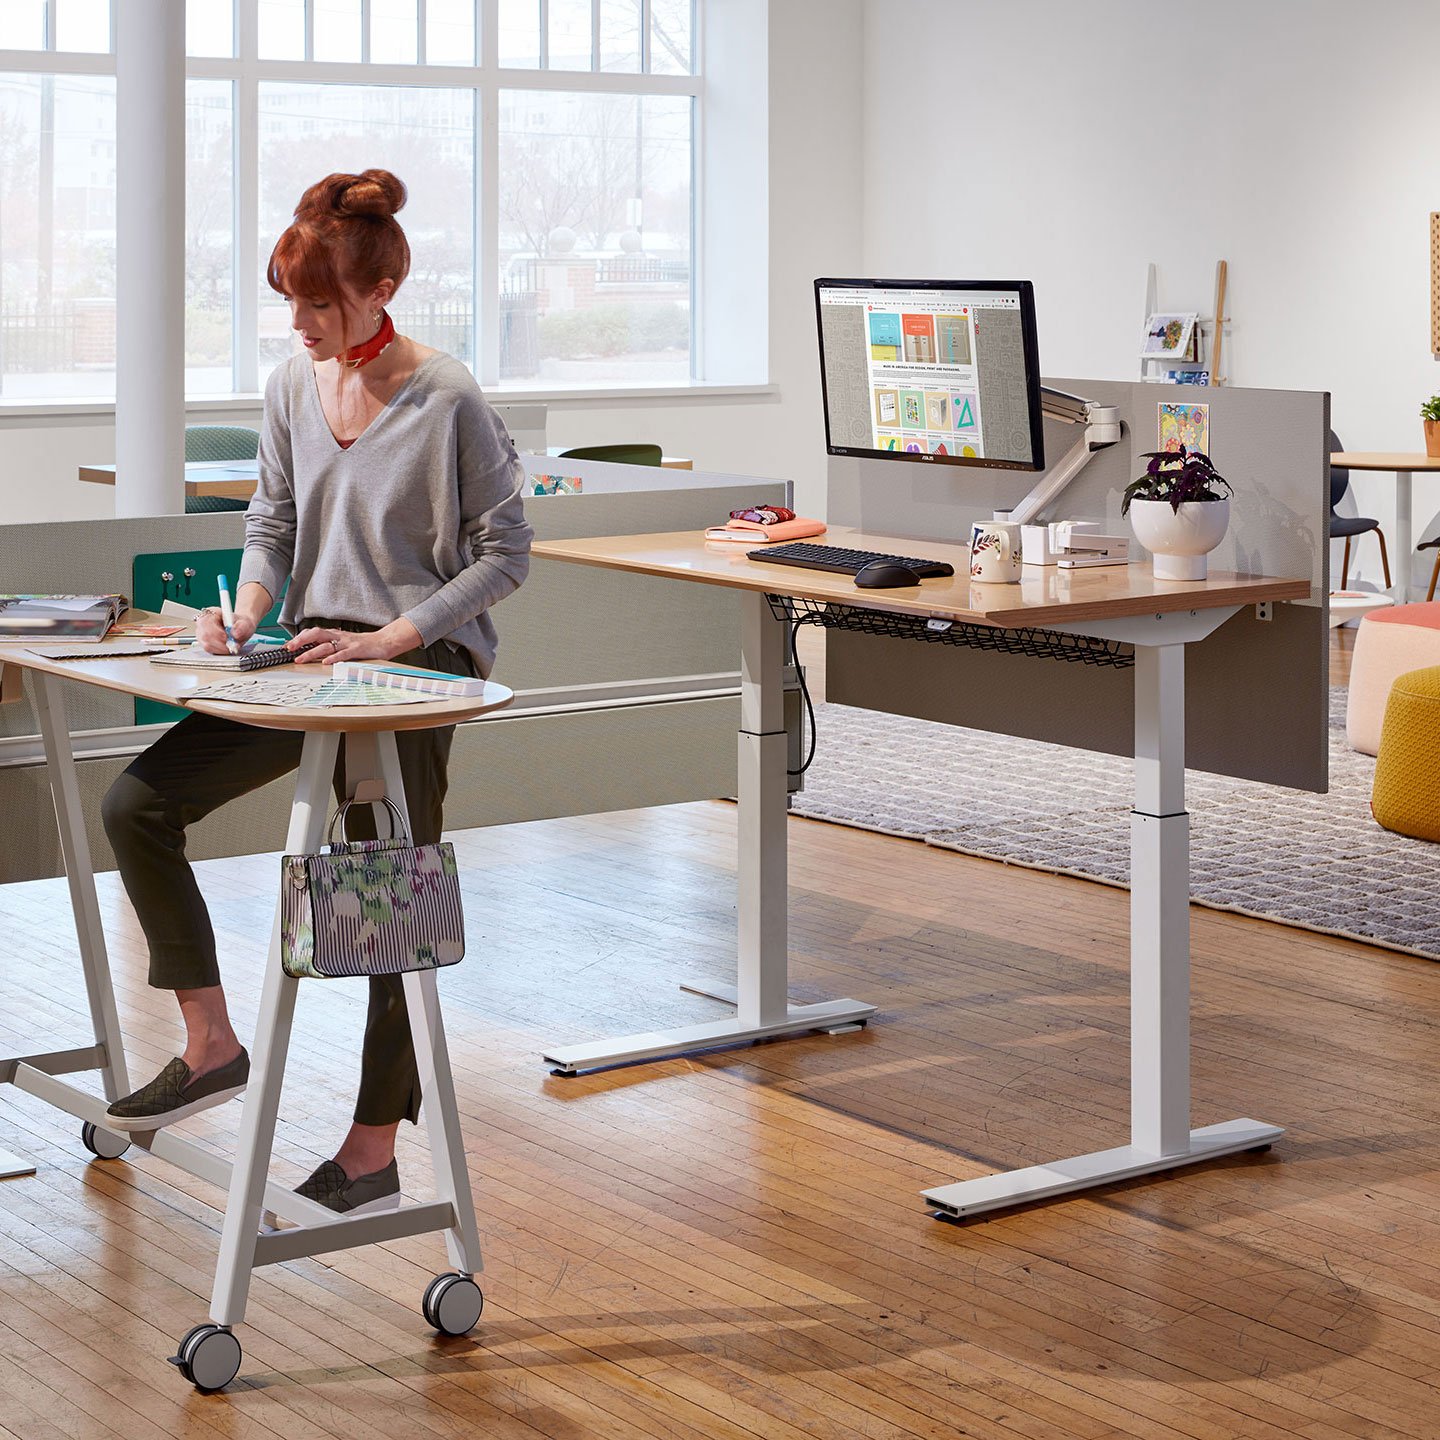 Haworth Compose Beam Workspace Divider in office area with employee on adjustable height desk in office